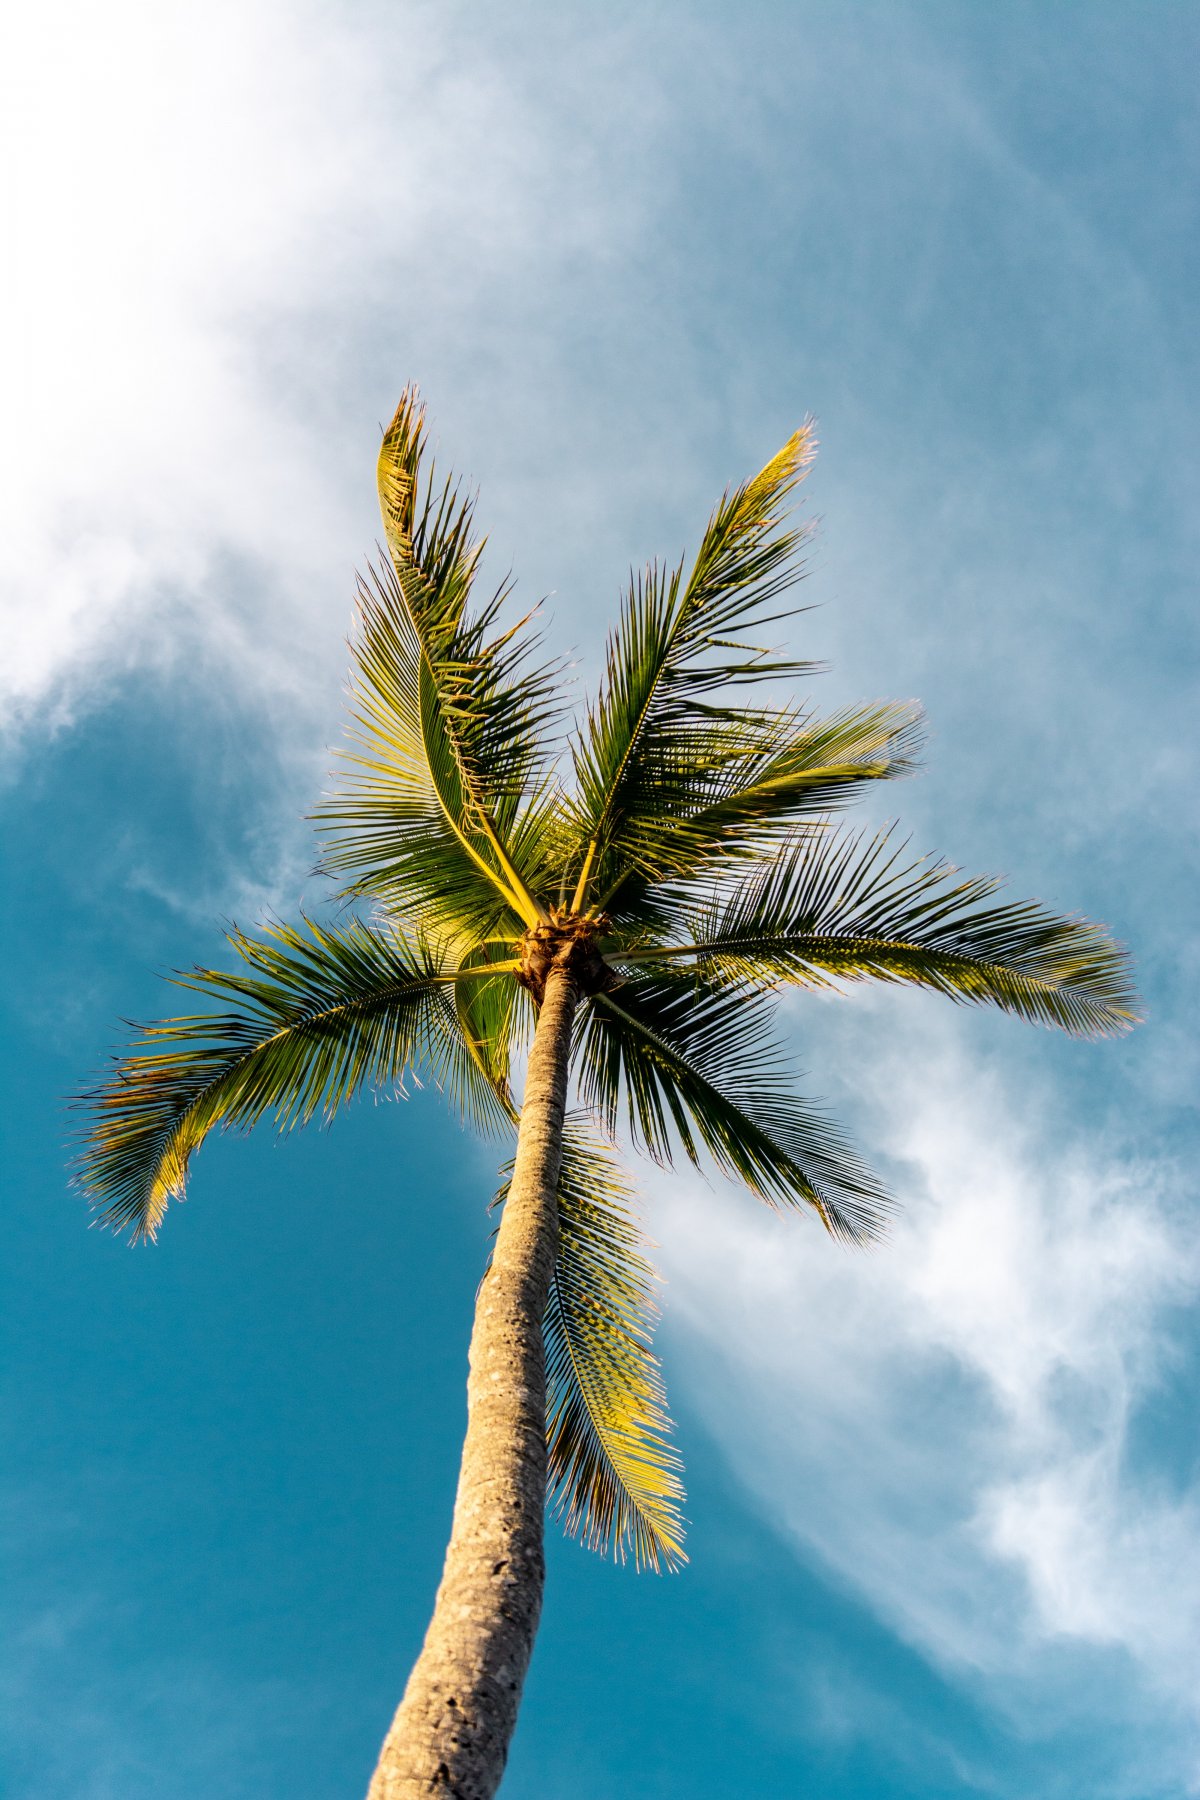 Picture of palm trees under blue sky and white clouds